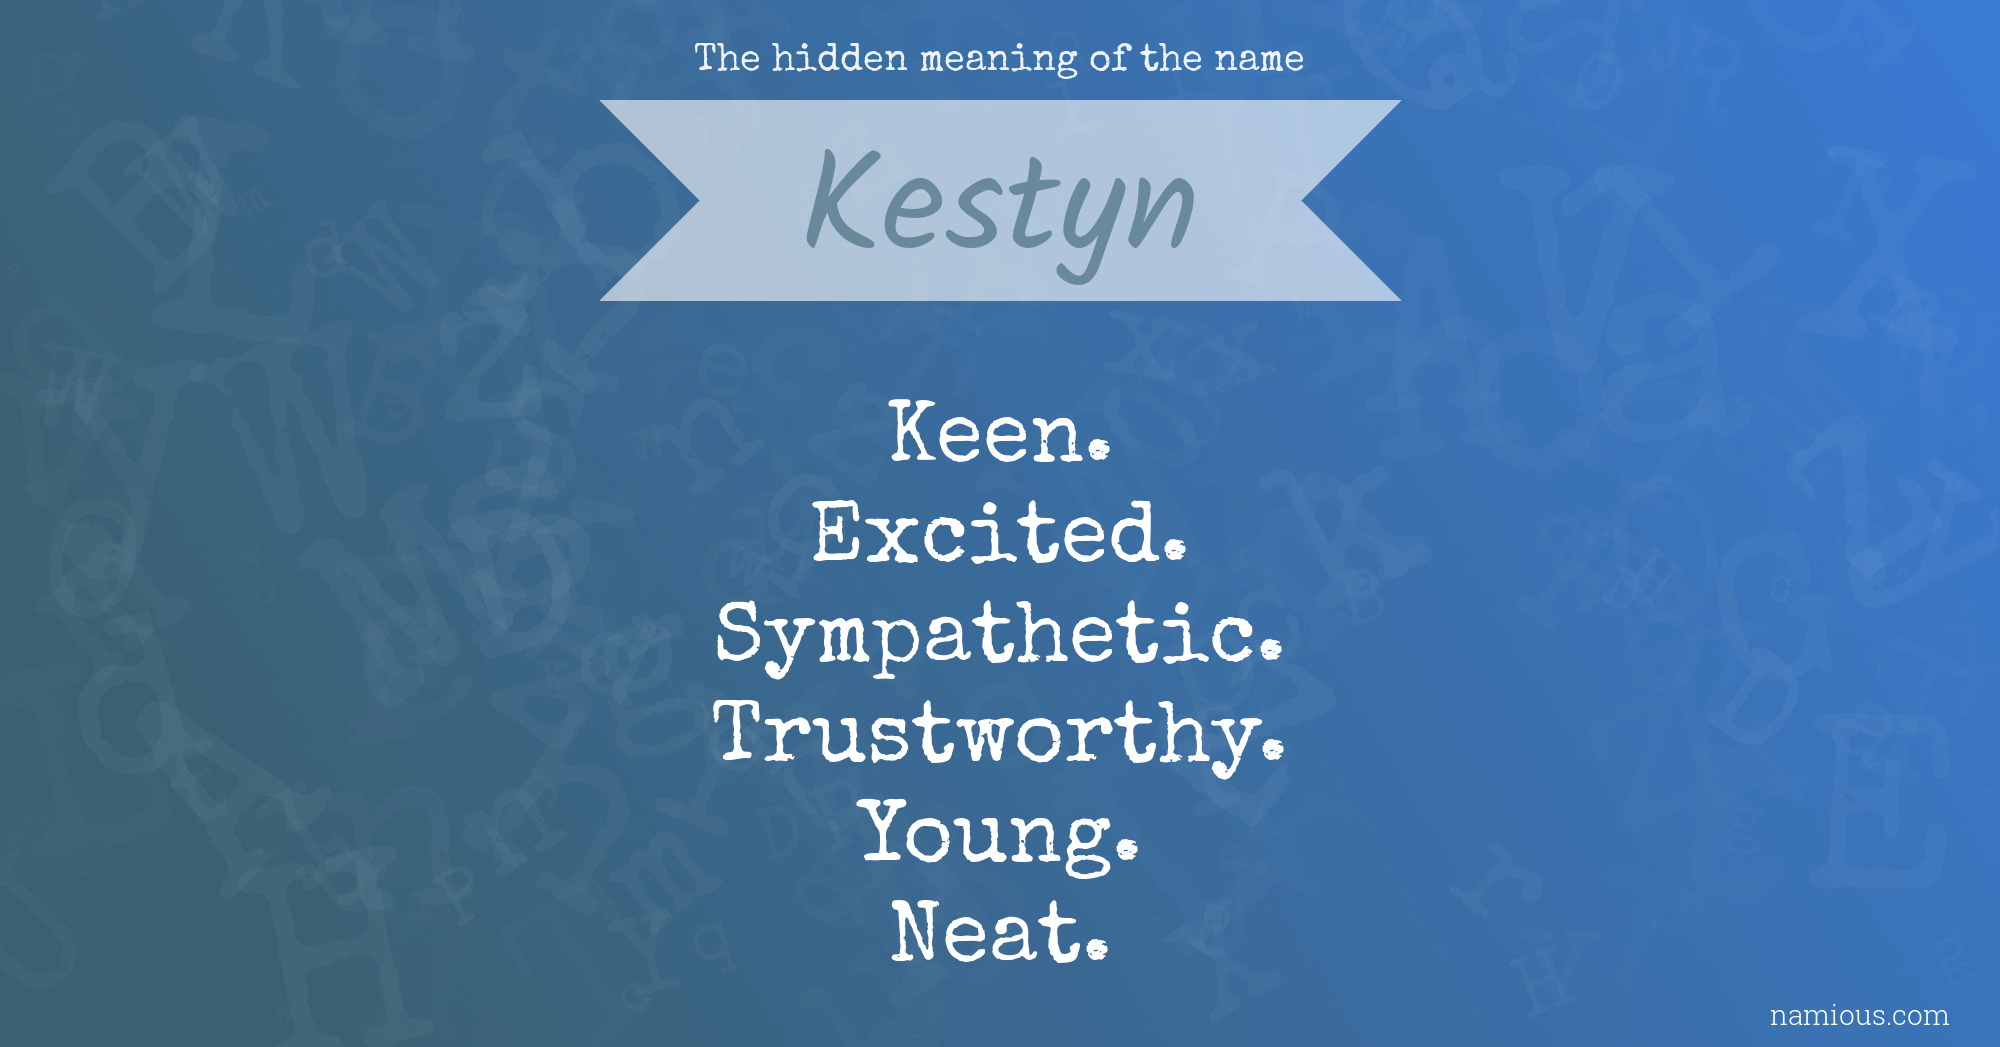 The hidden meaning of the name Kestyn